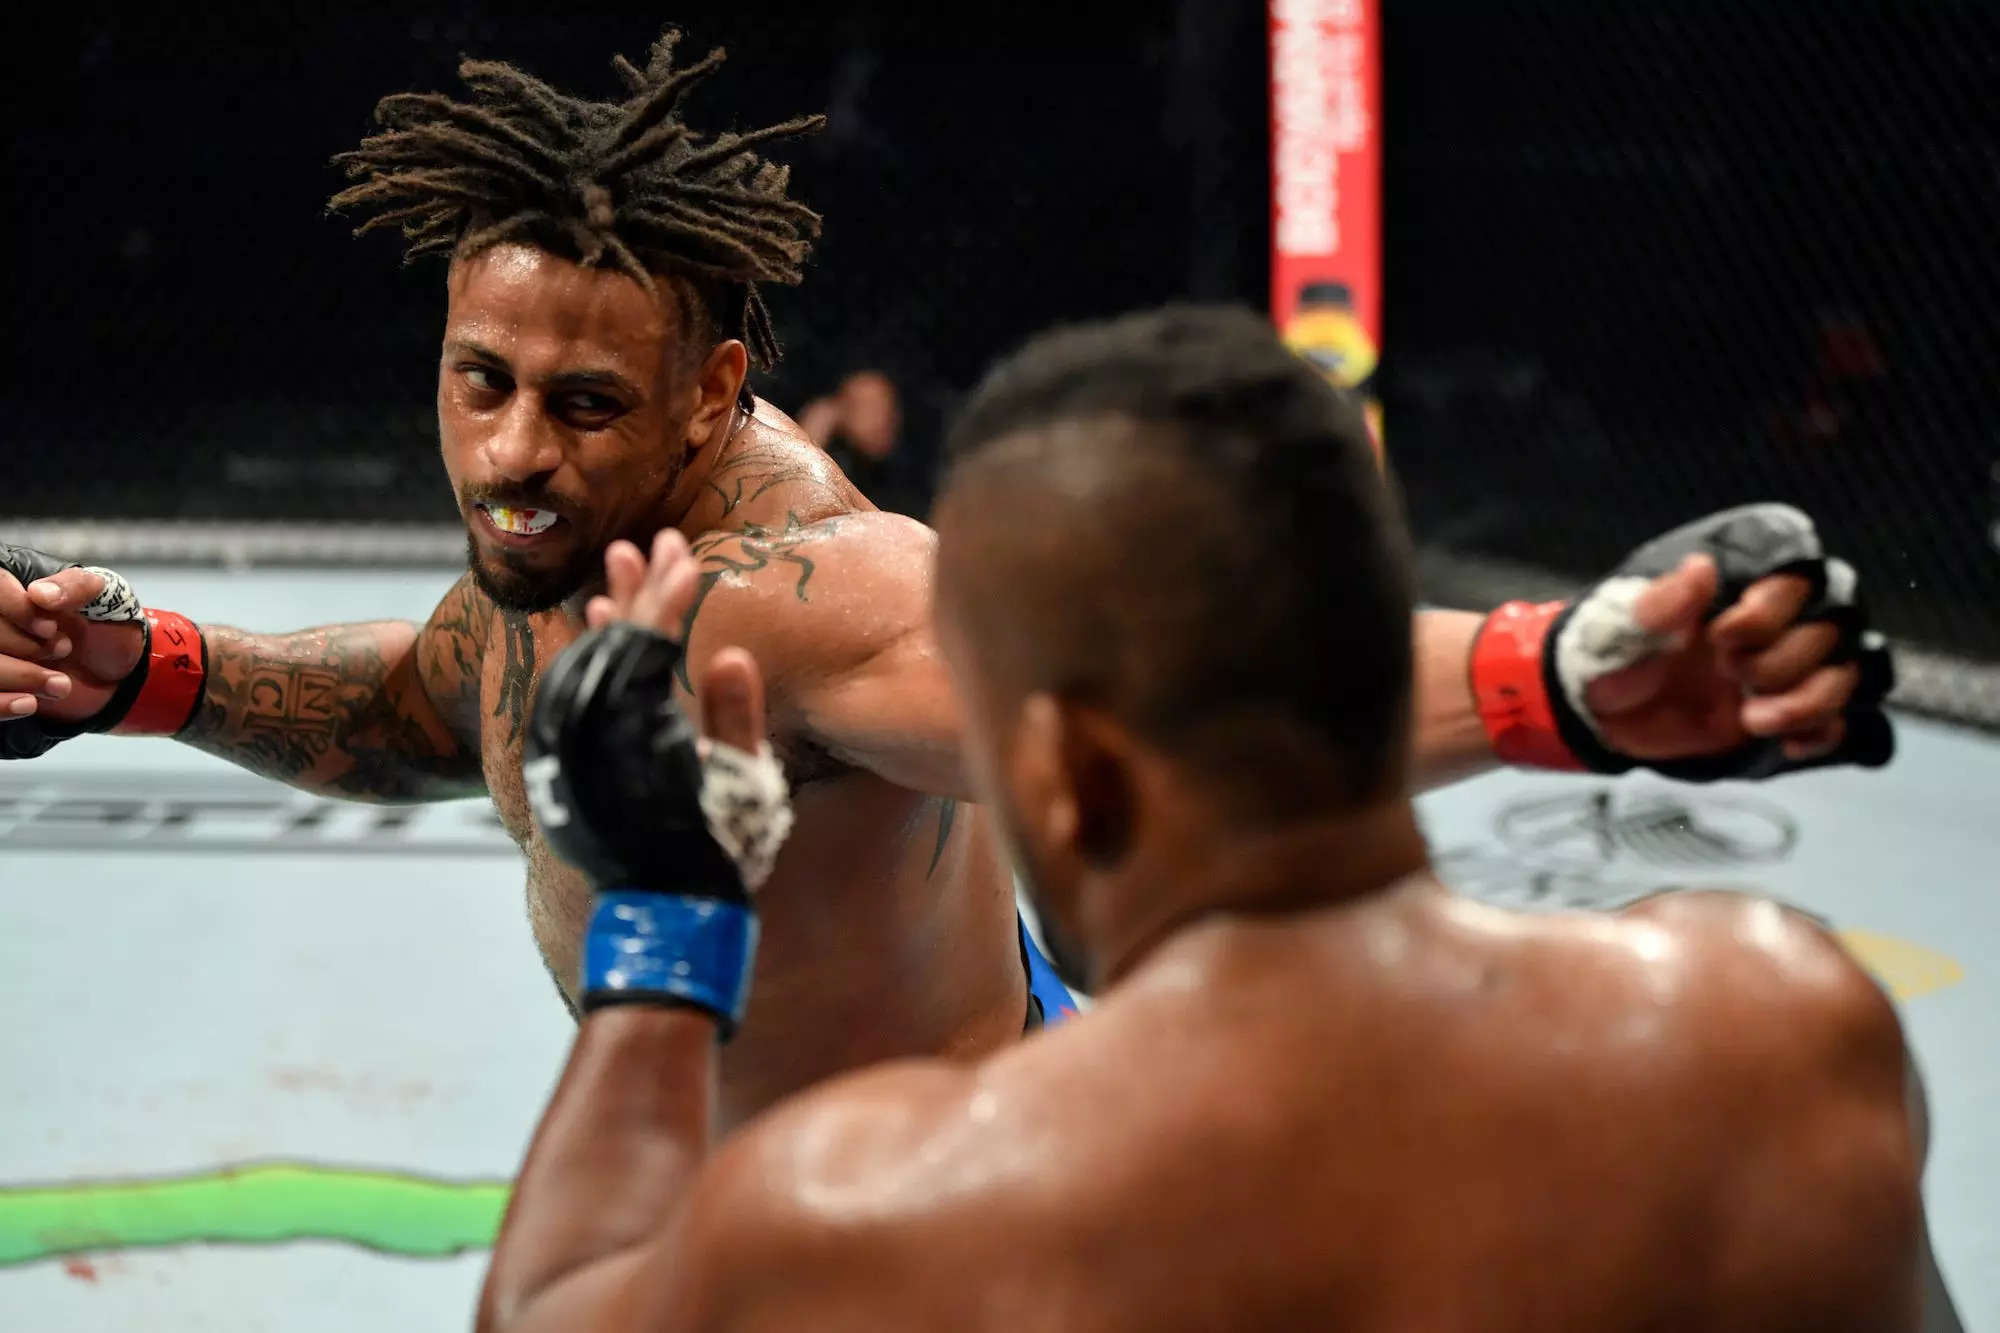 UFC heavyweight Greg Hardy wants to crossover into boxing and